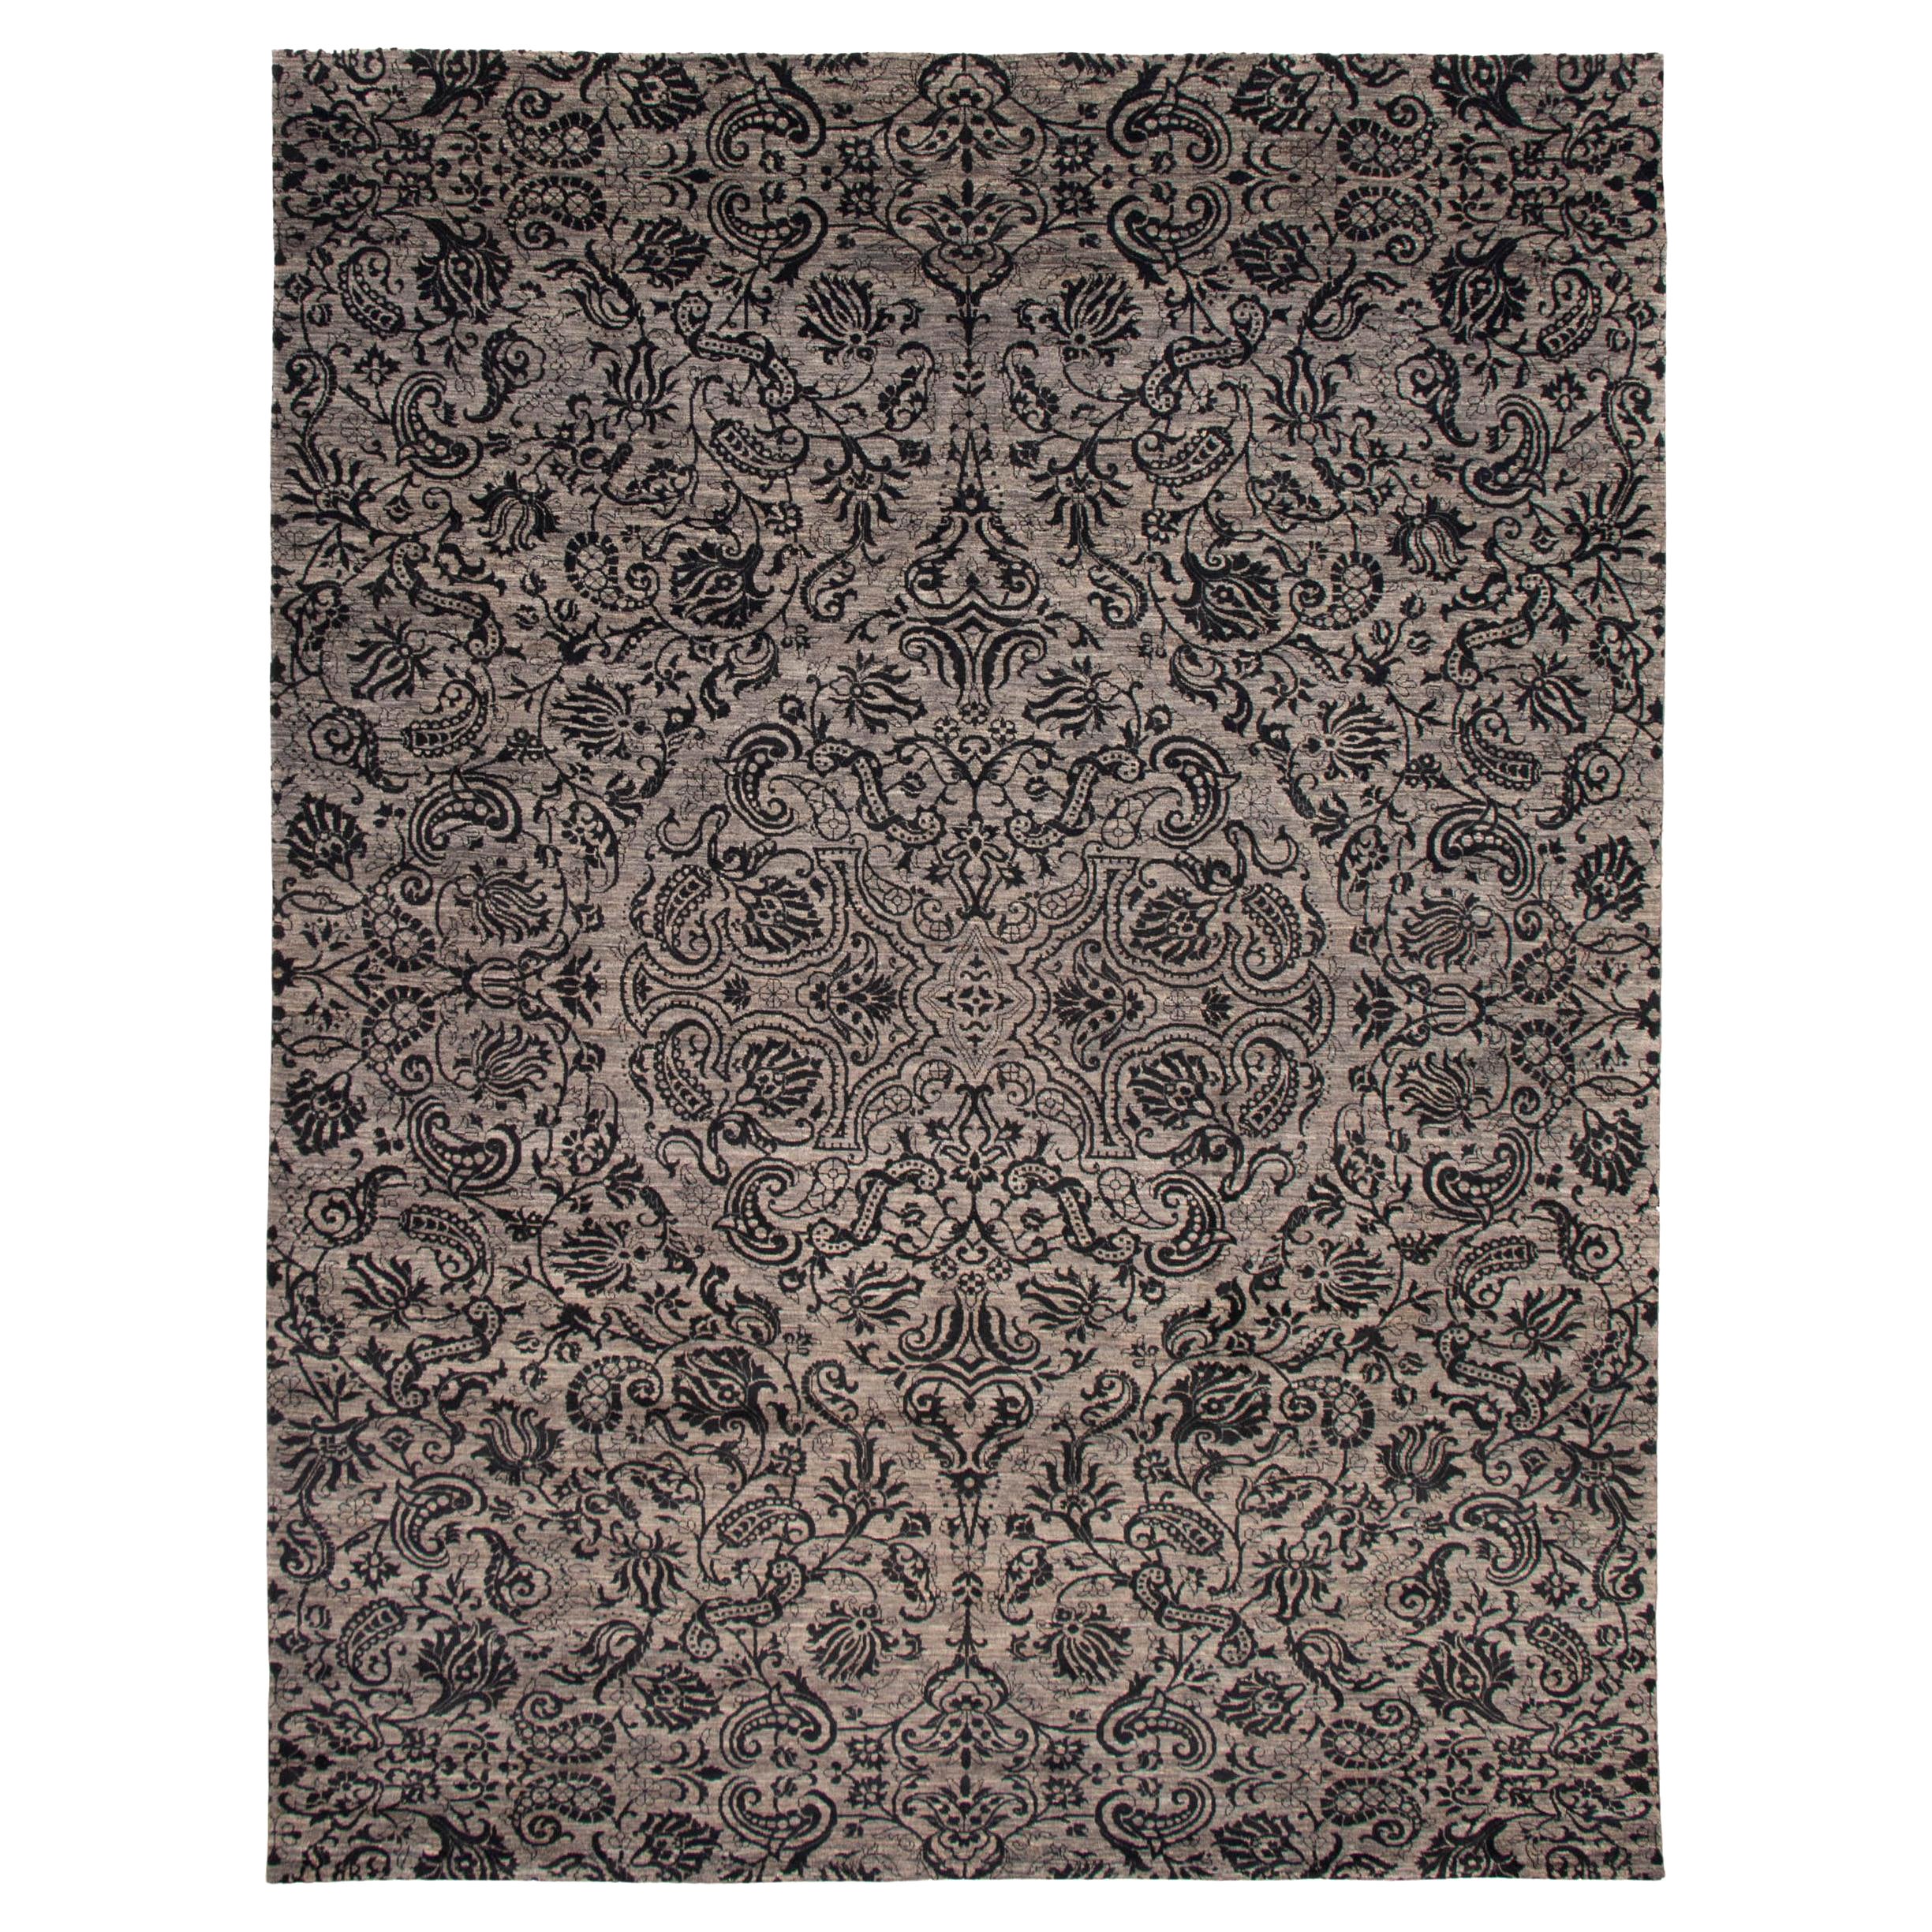 Gray and Black Transitional Paisley Hand-Knotted Carpet, 9' x 12'